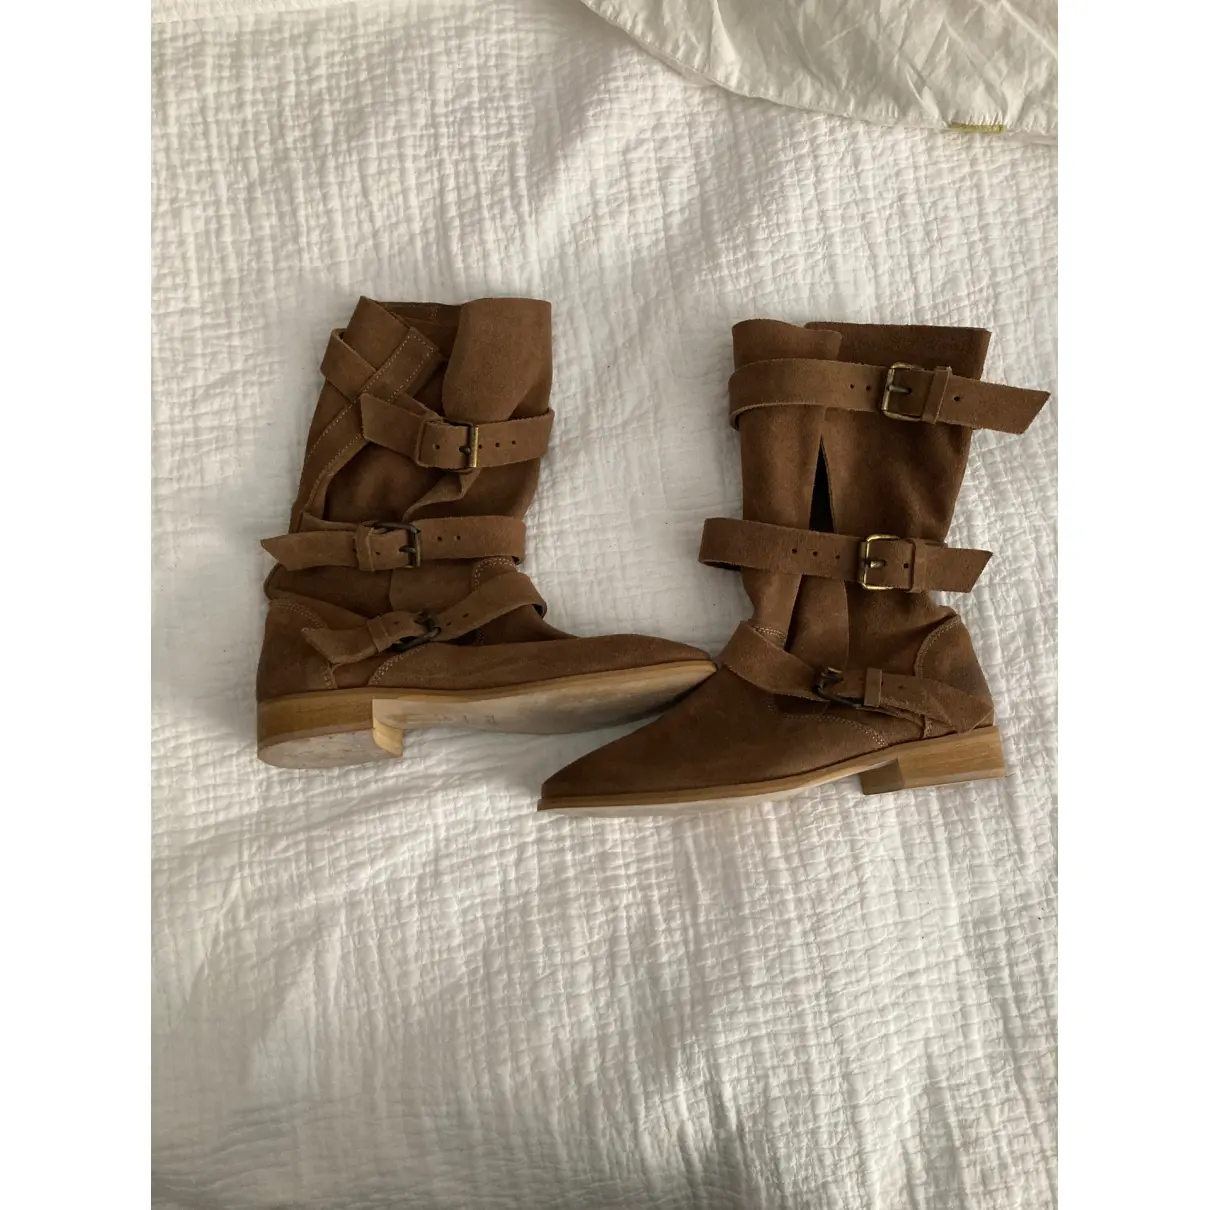 Ankle boots Maje